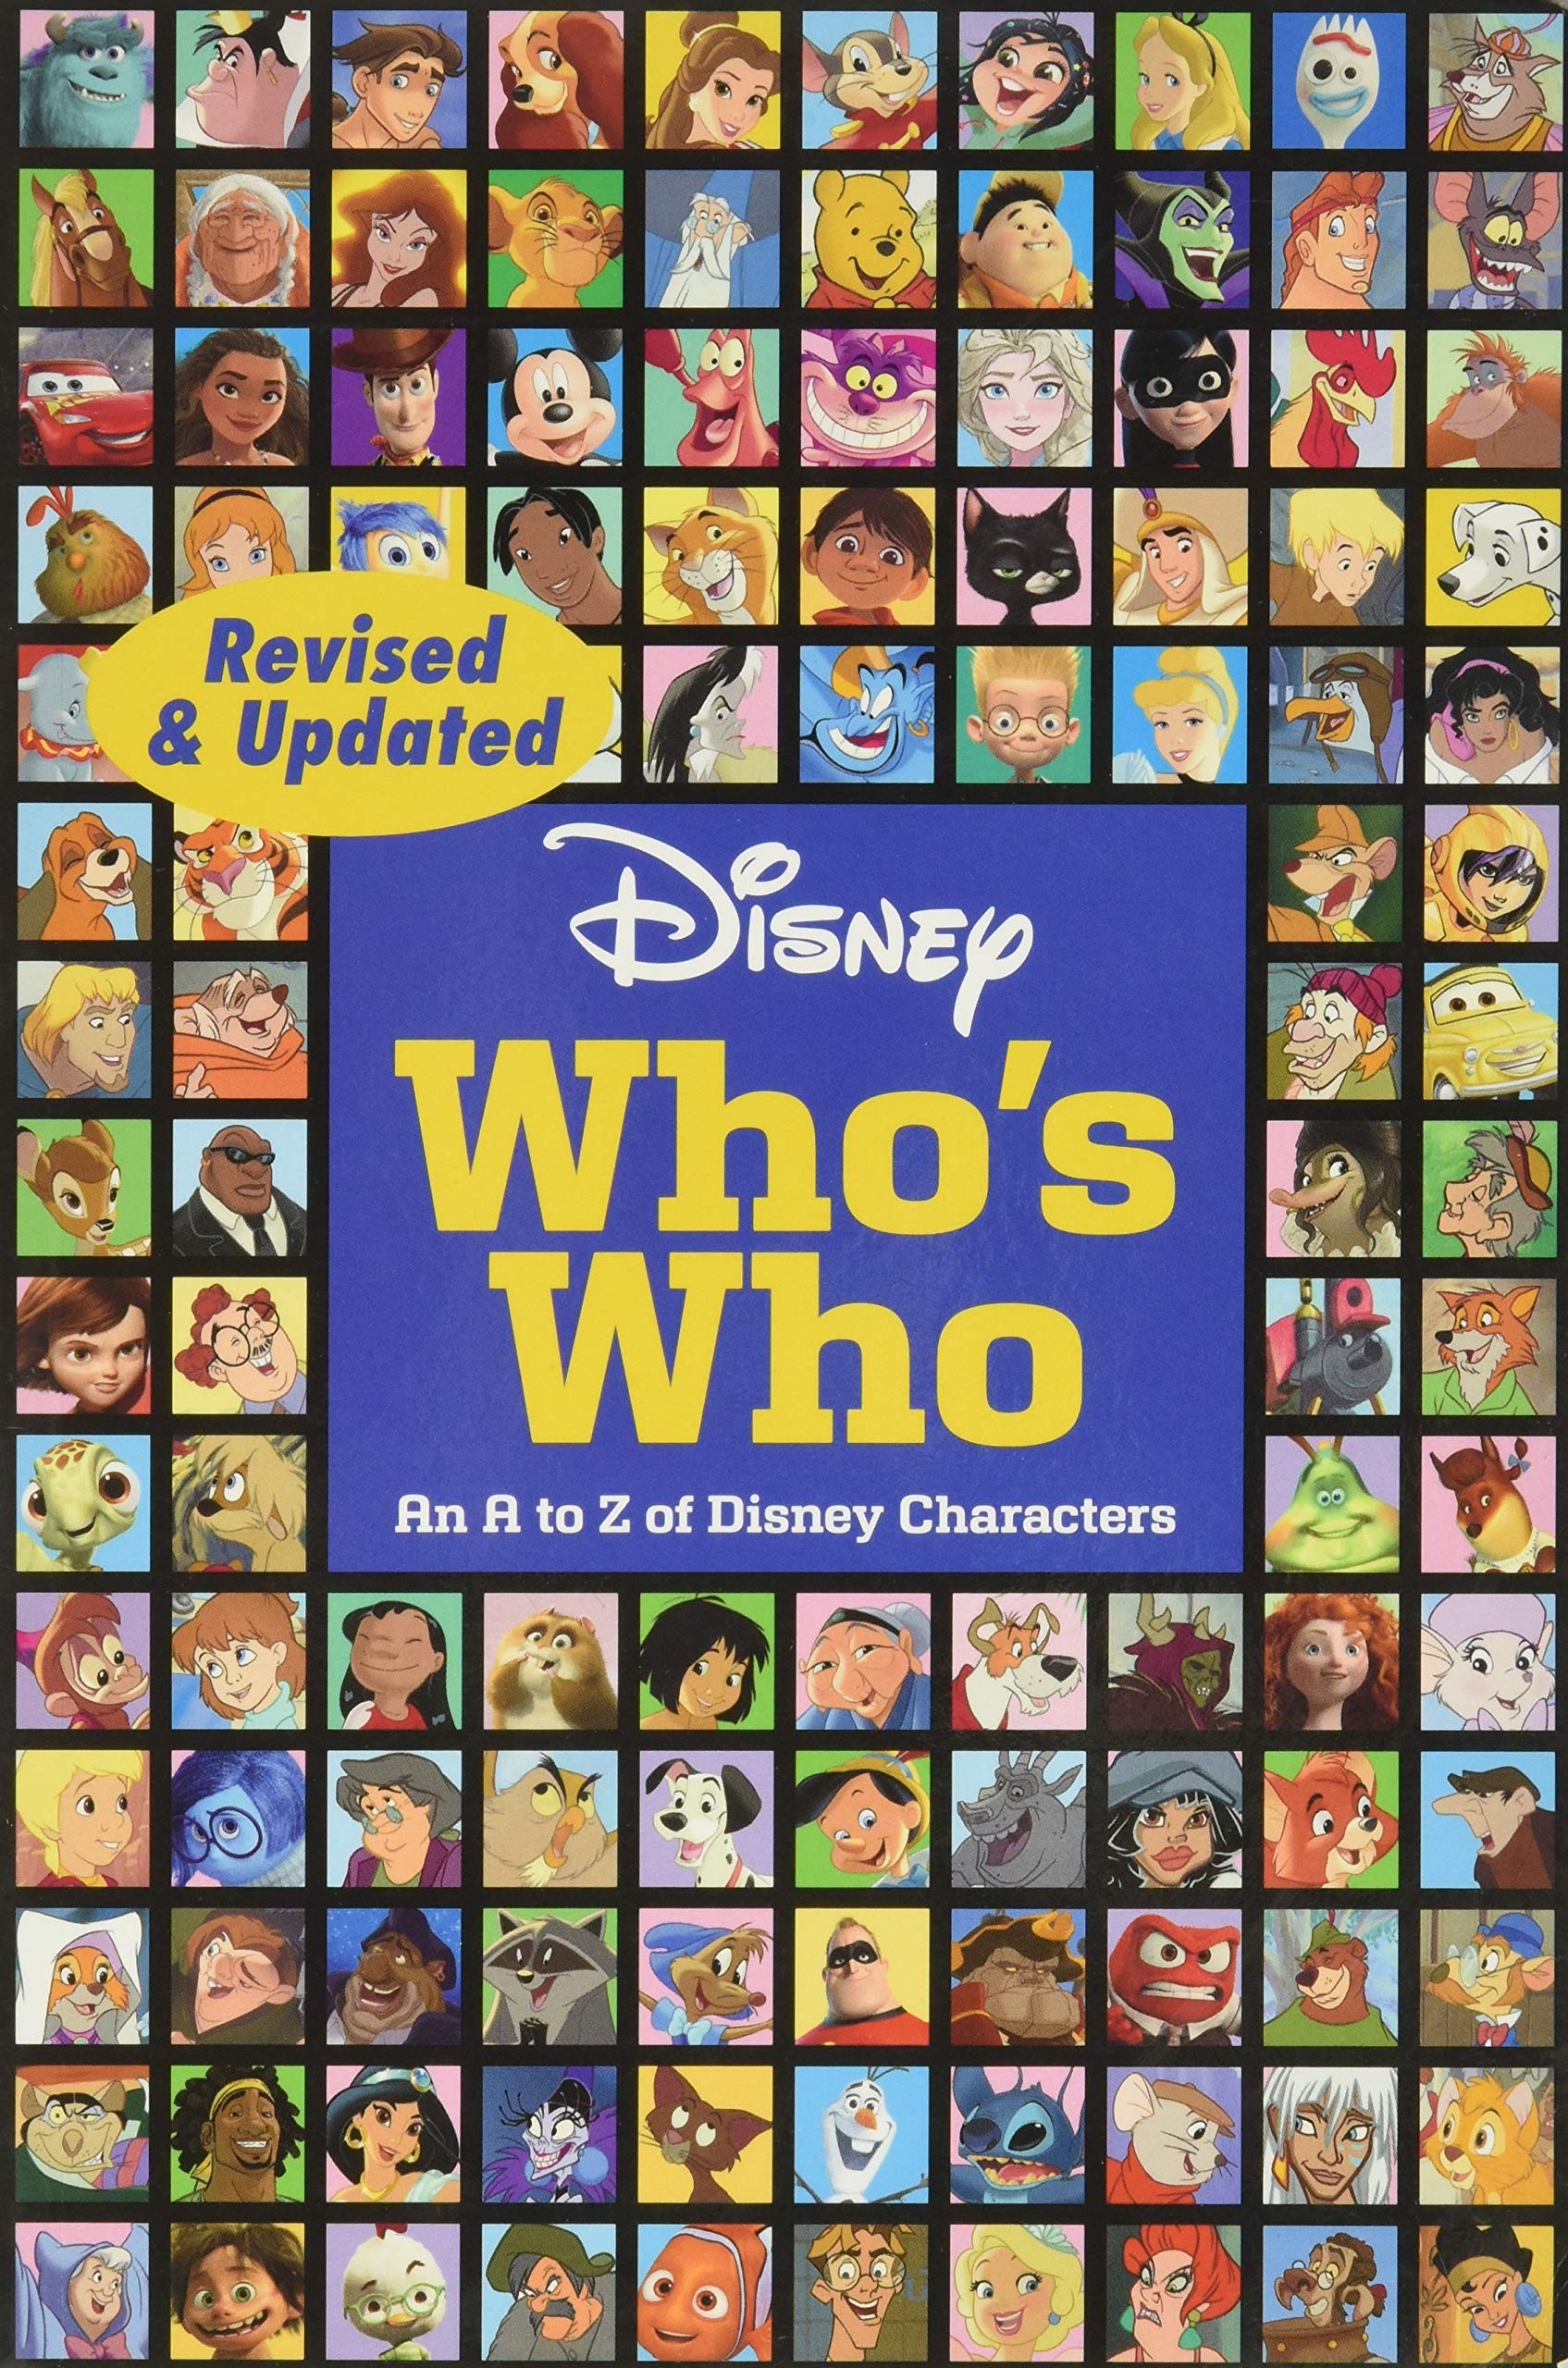 disney-who-s-who-an-a-to-z-of-disney-characters